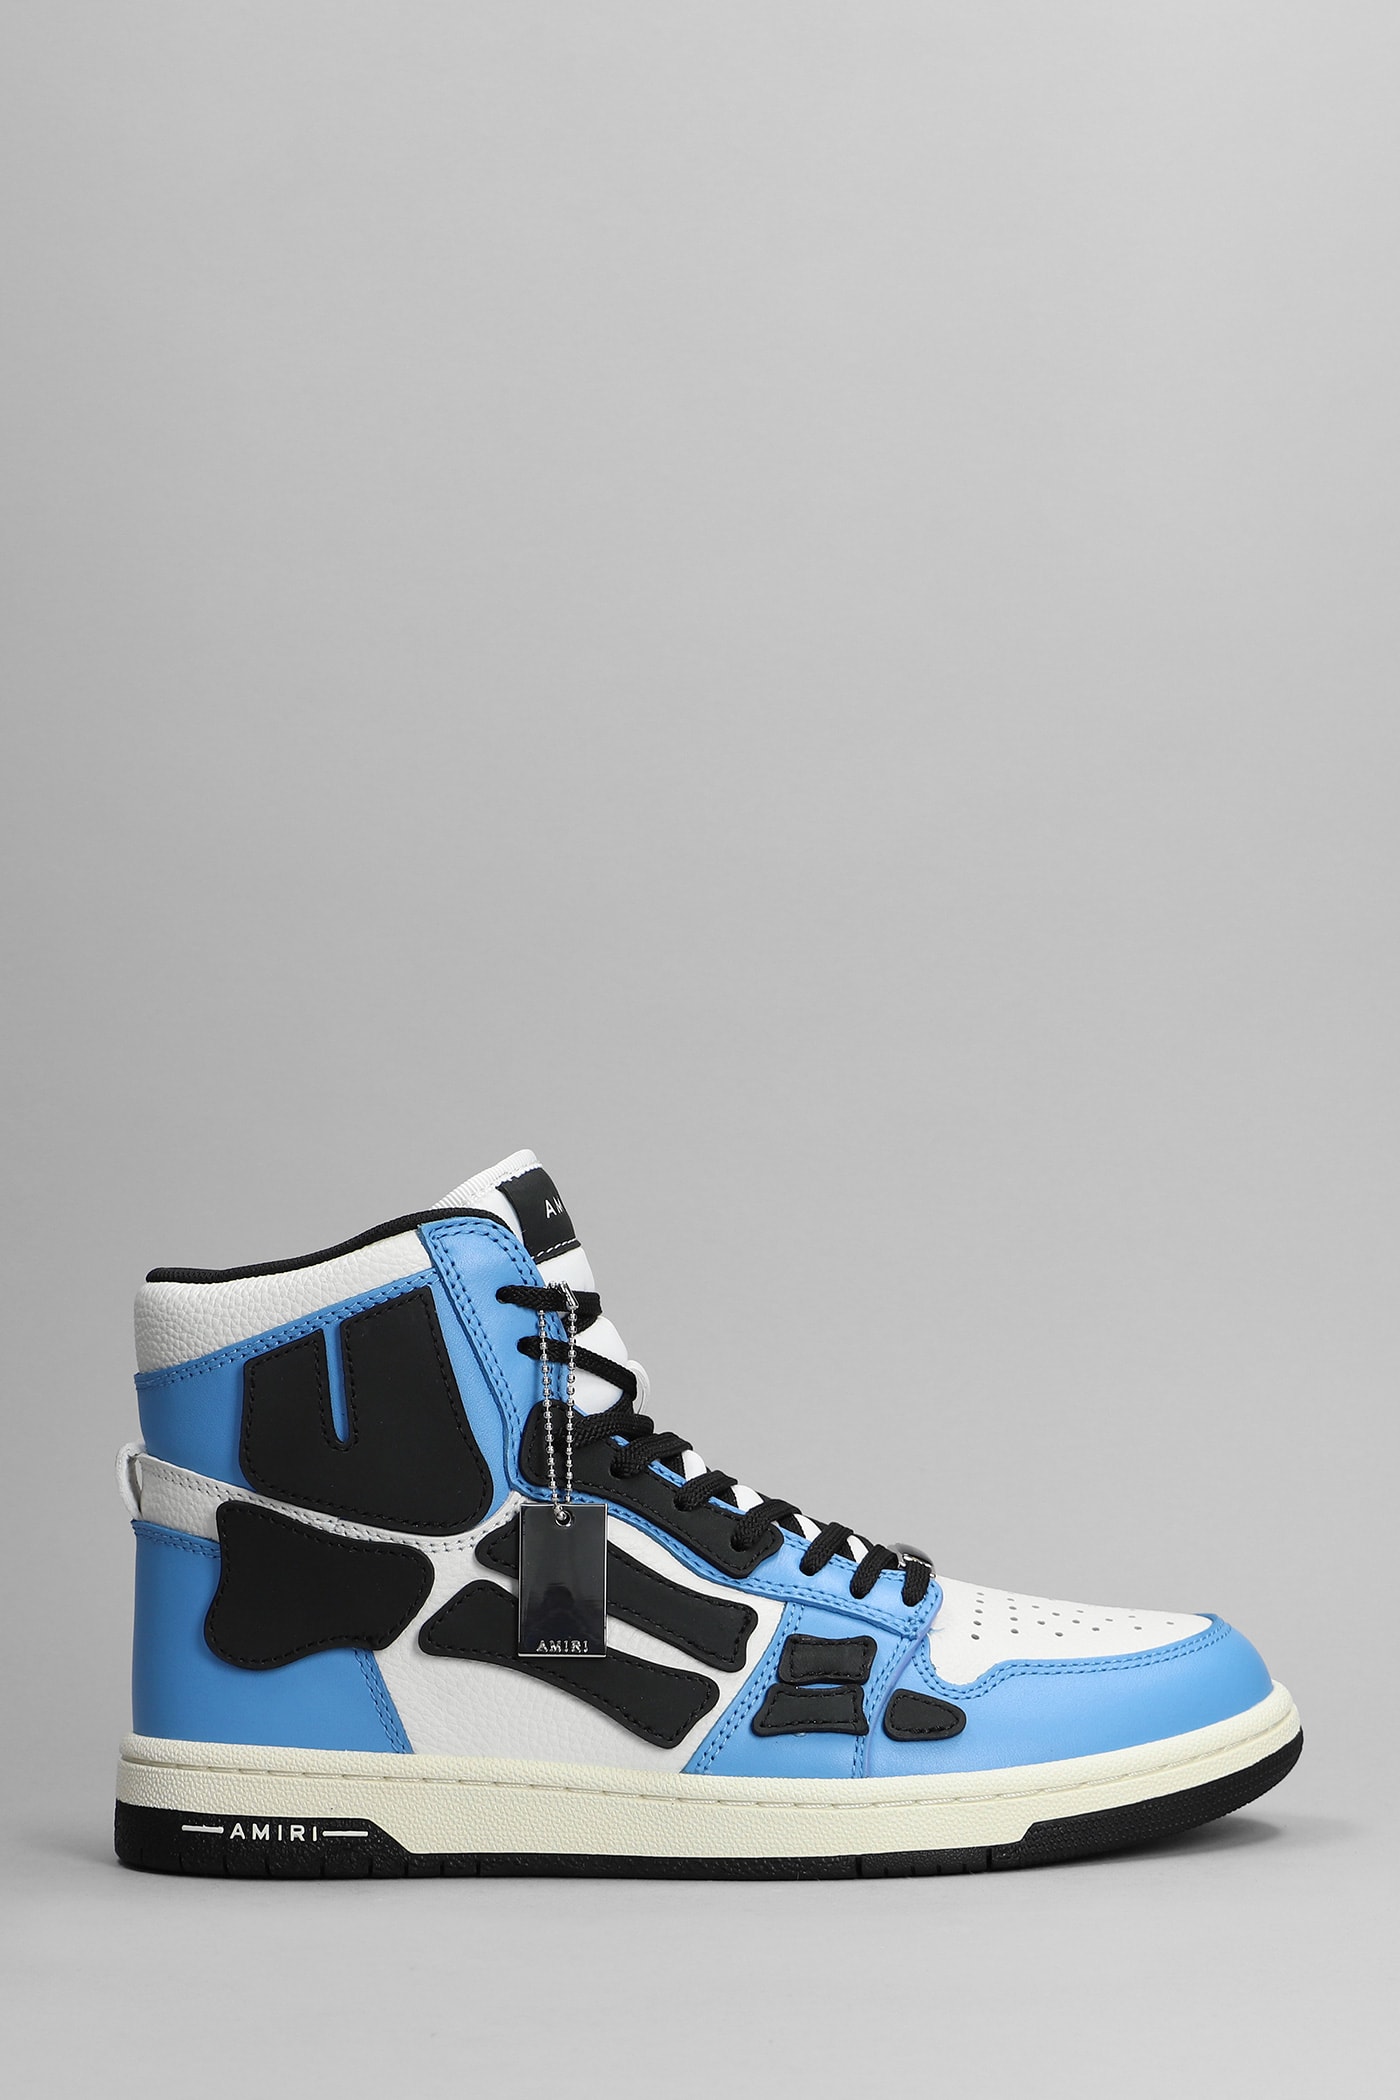 AMIRI SNEAKERS IN BLUE LEATHER